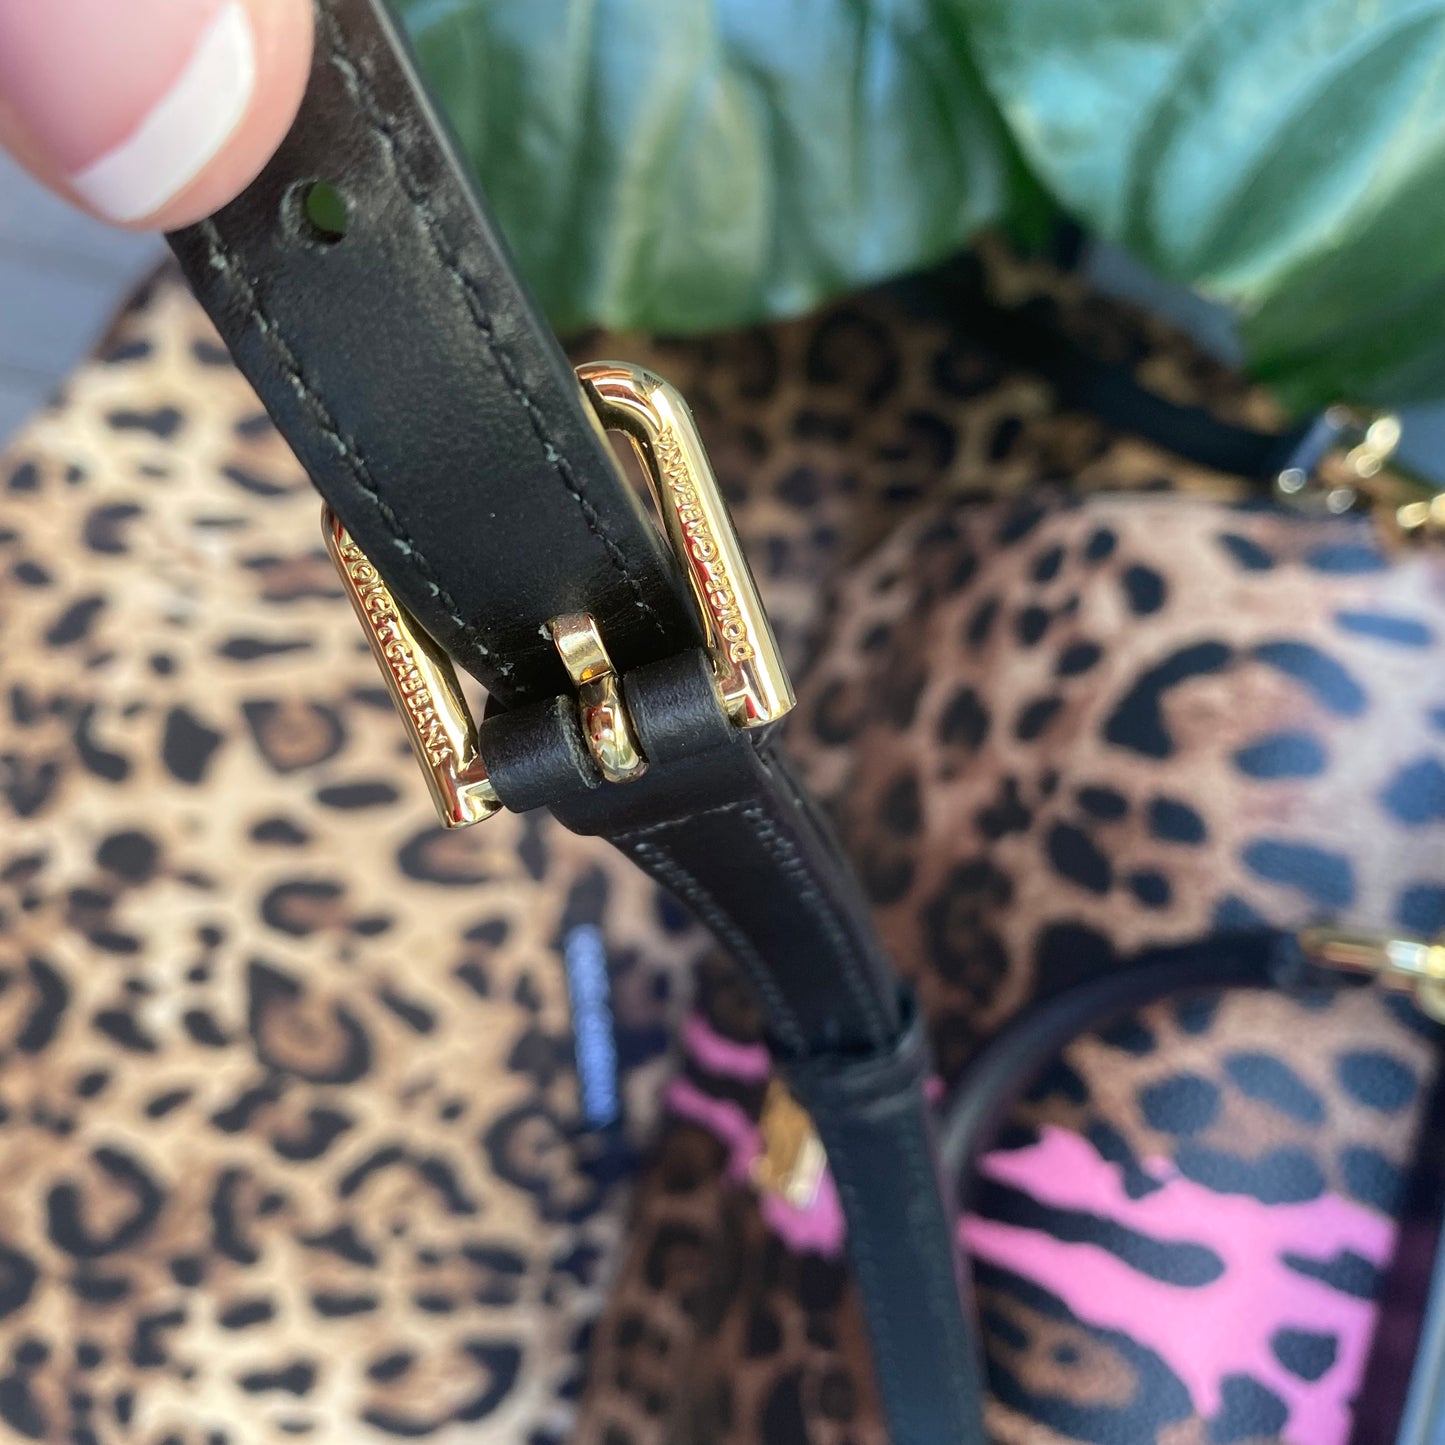 DOLCE & GABBANA LEOPARD LEATHER SMALL SICILY BAG